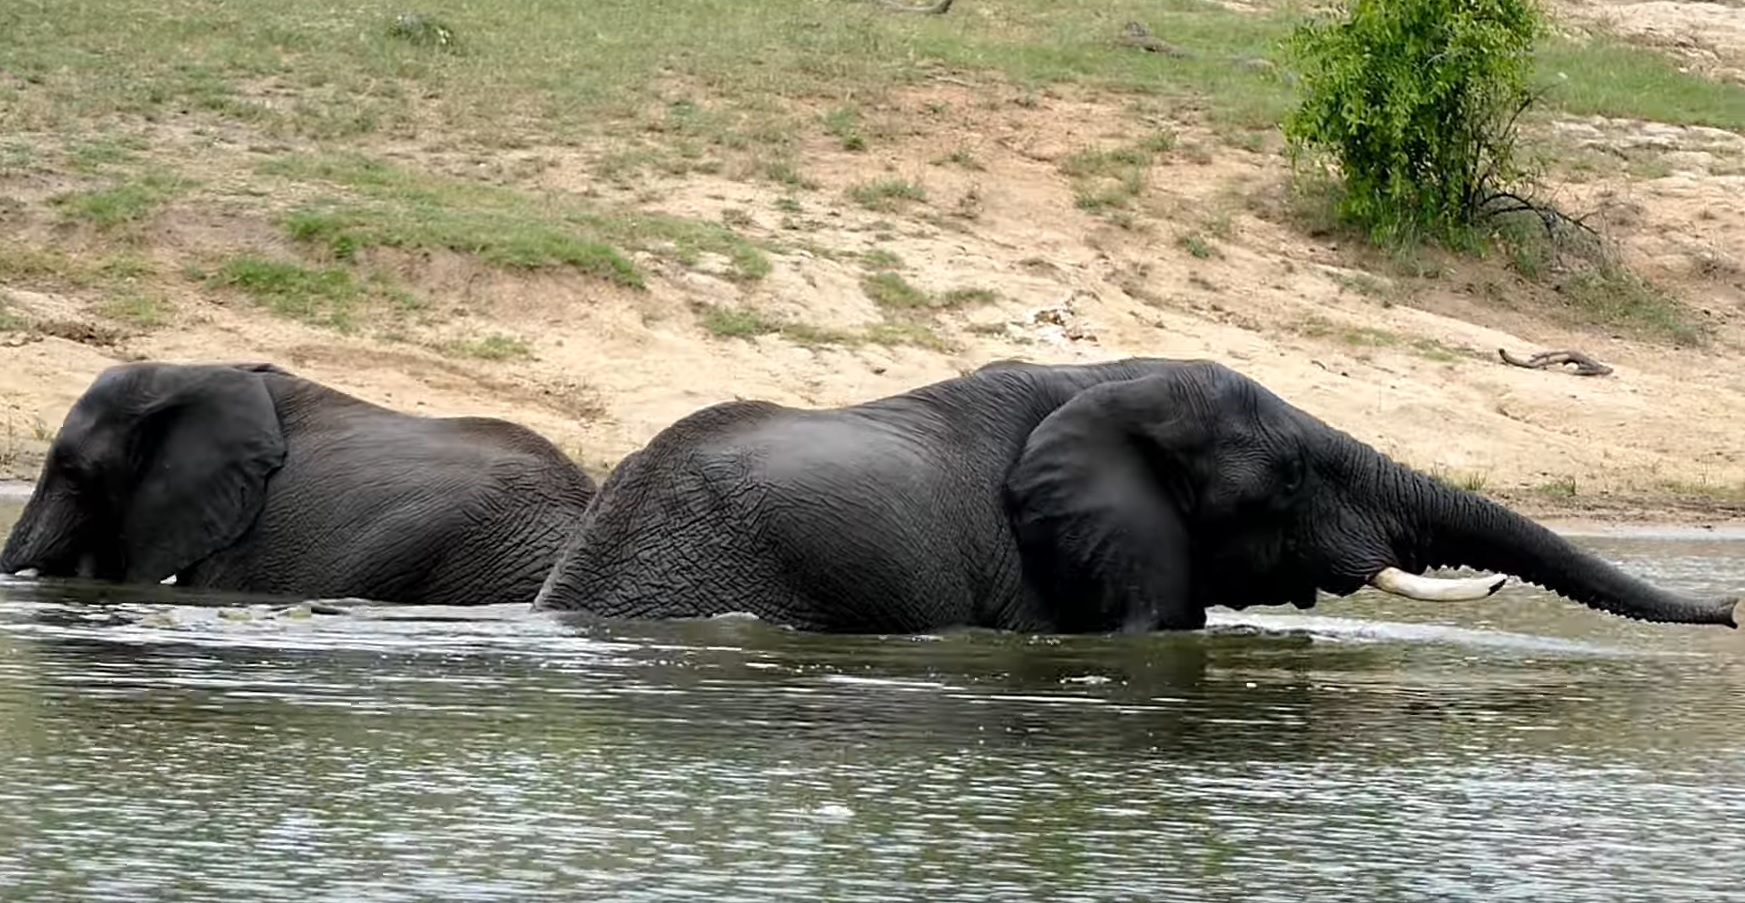 Elephants Play In The Water